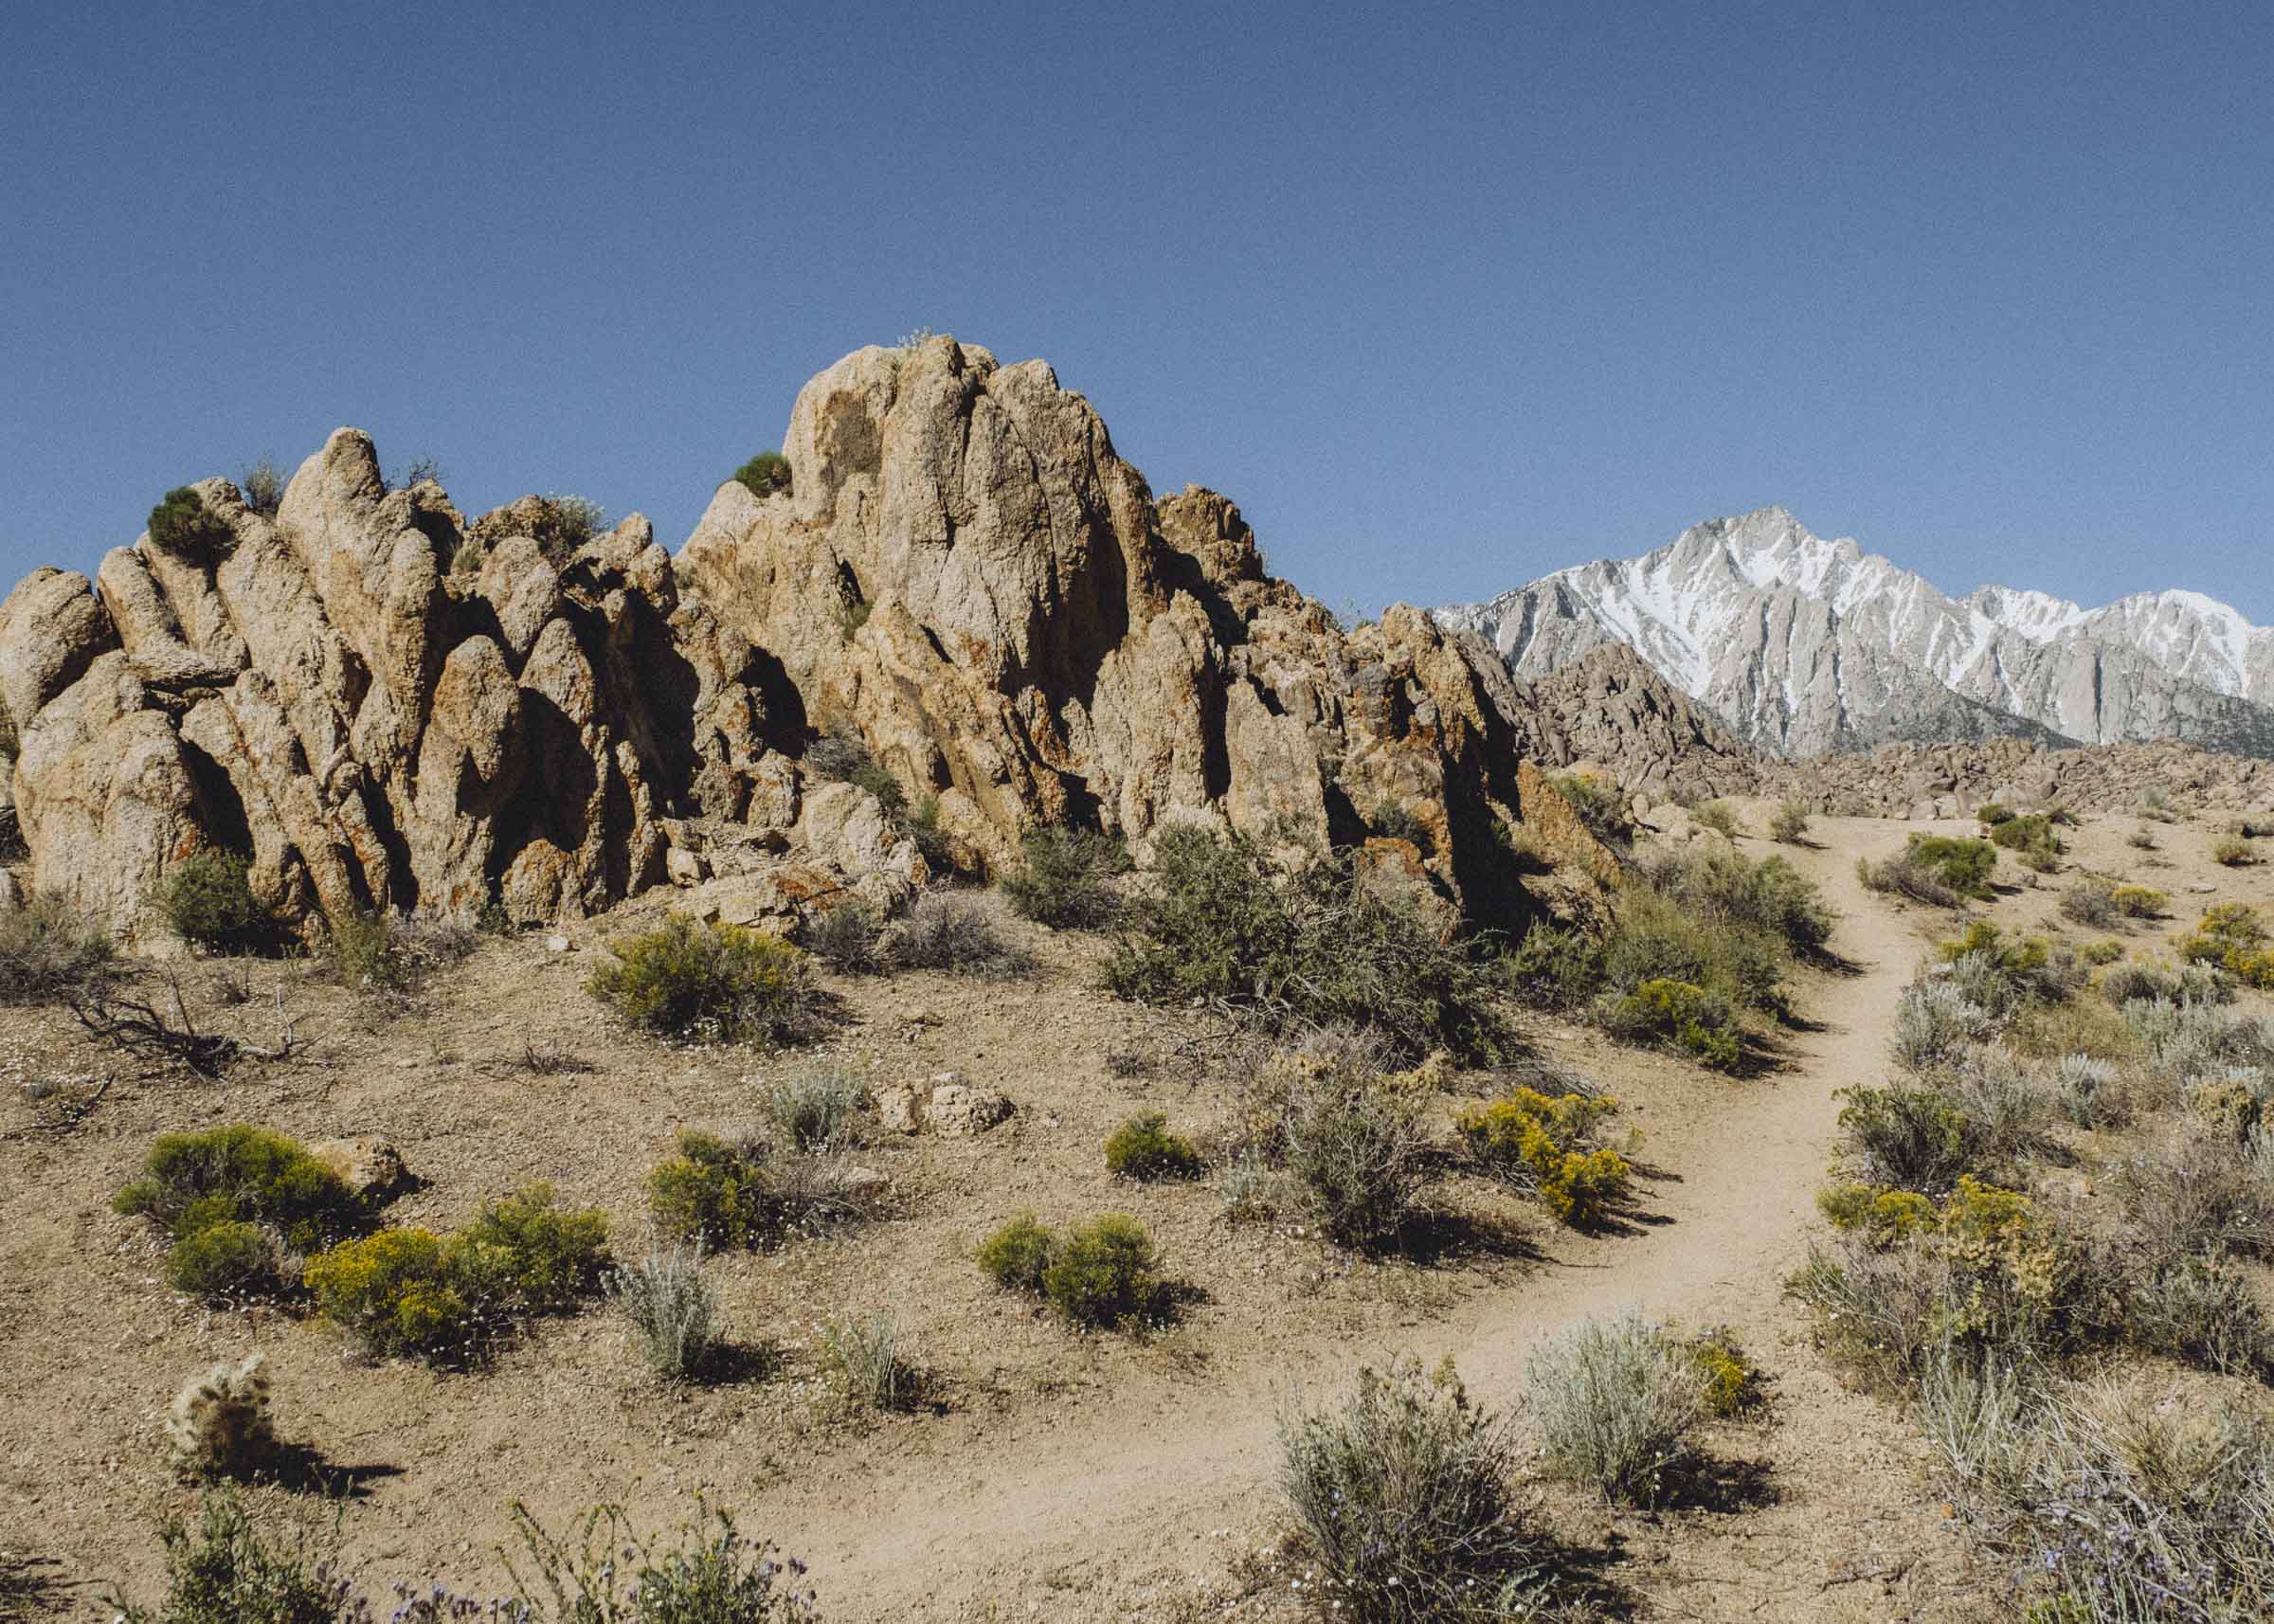 Strolling the trails through the weathered rocks of the Alabama Hills, CA